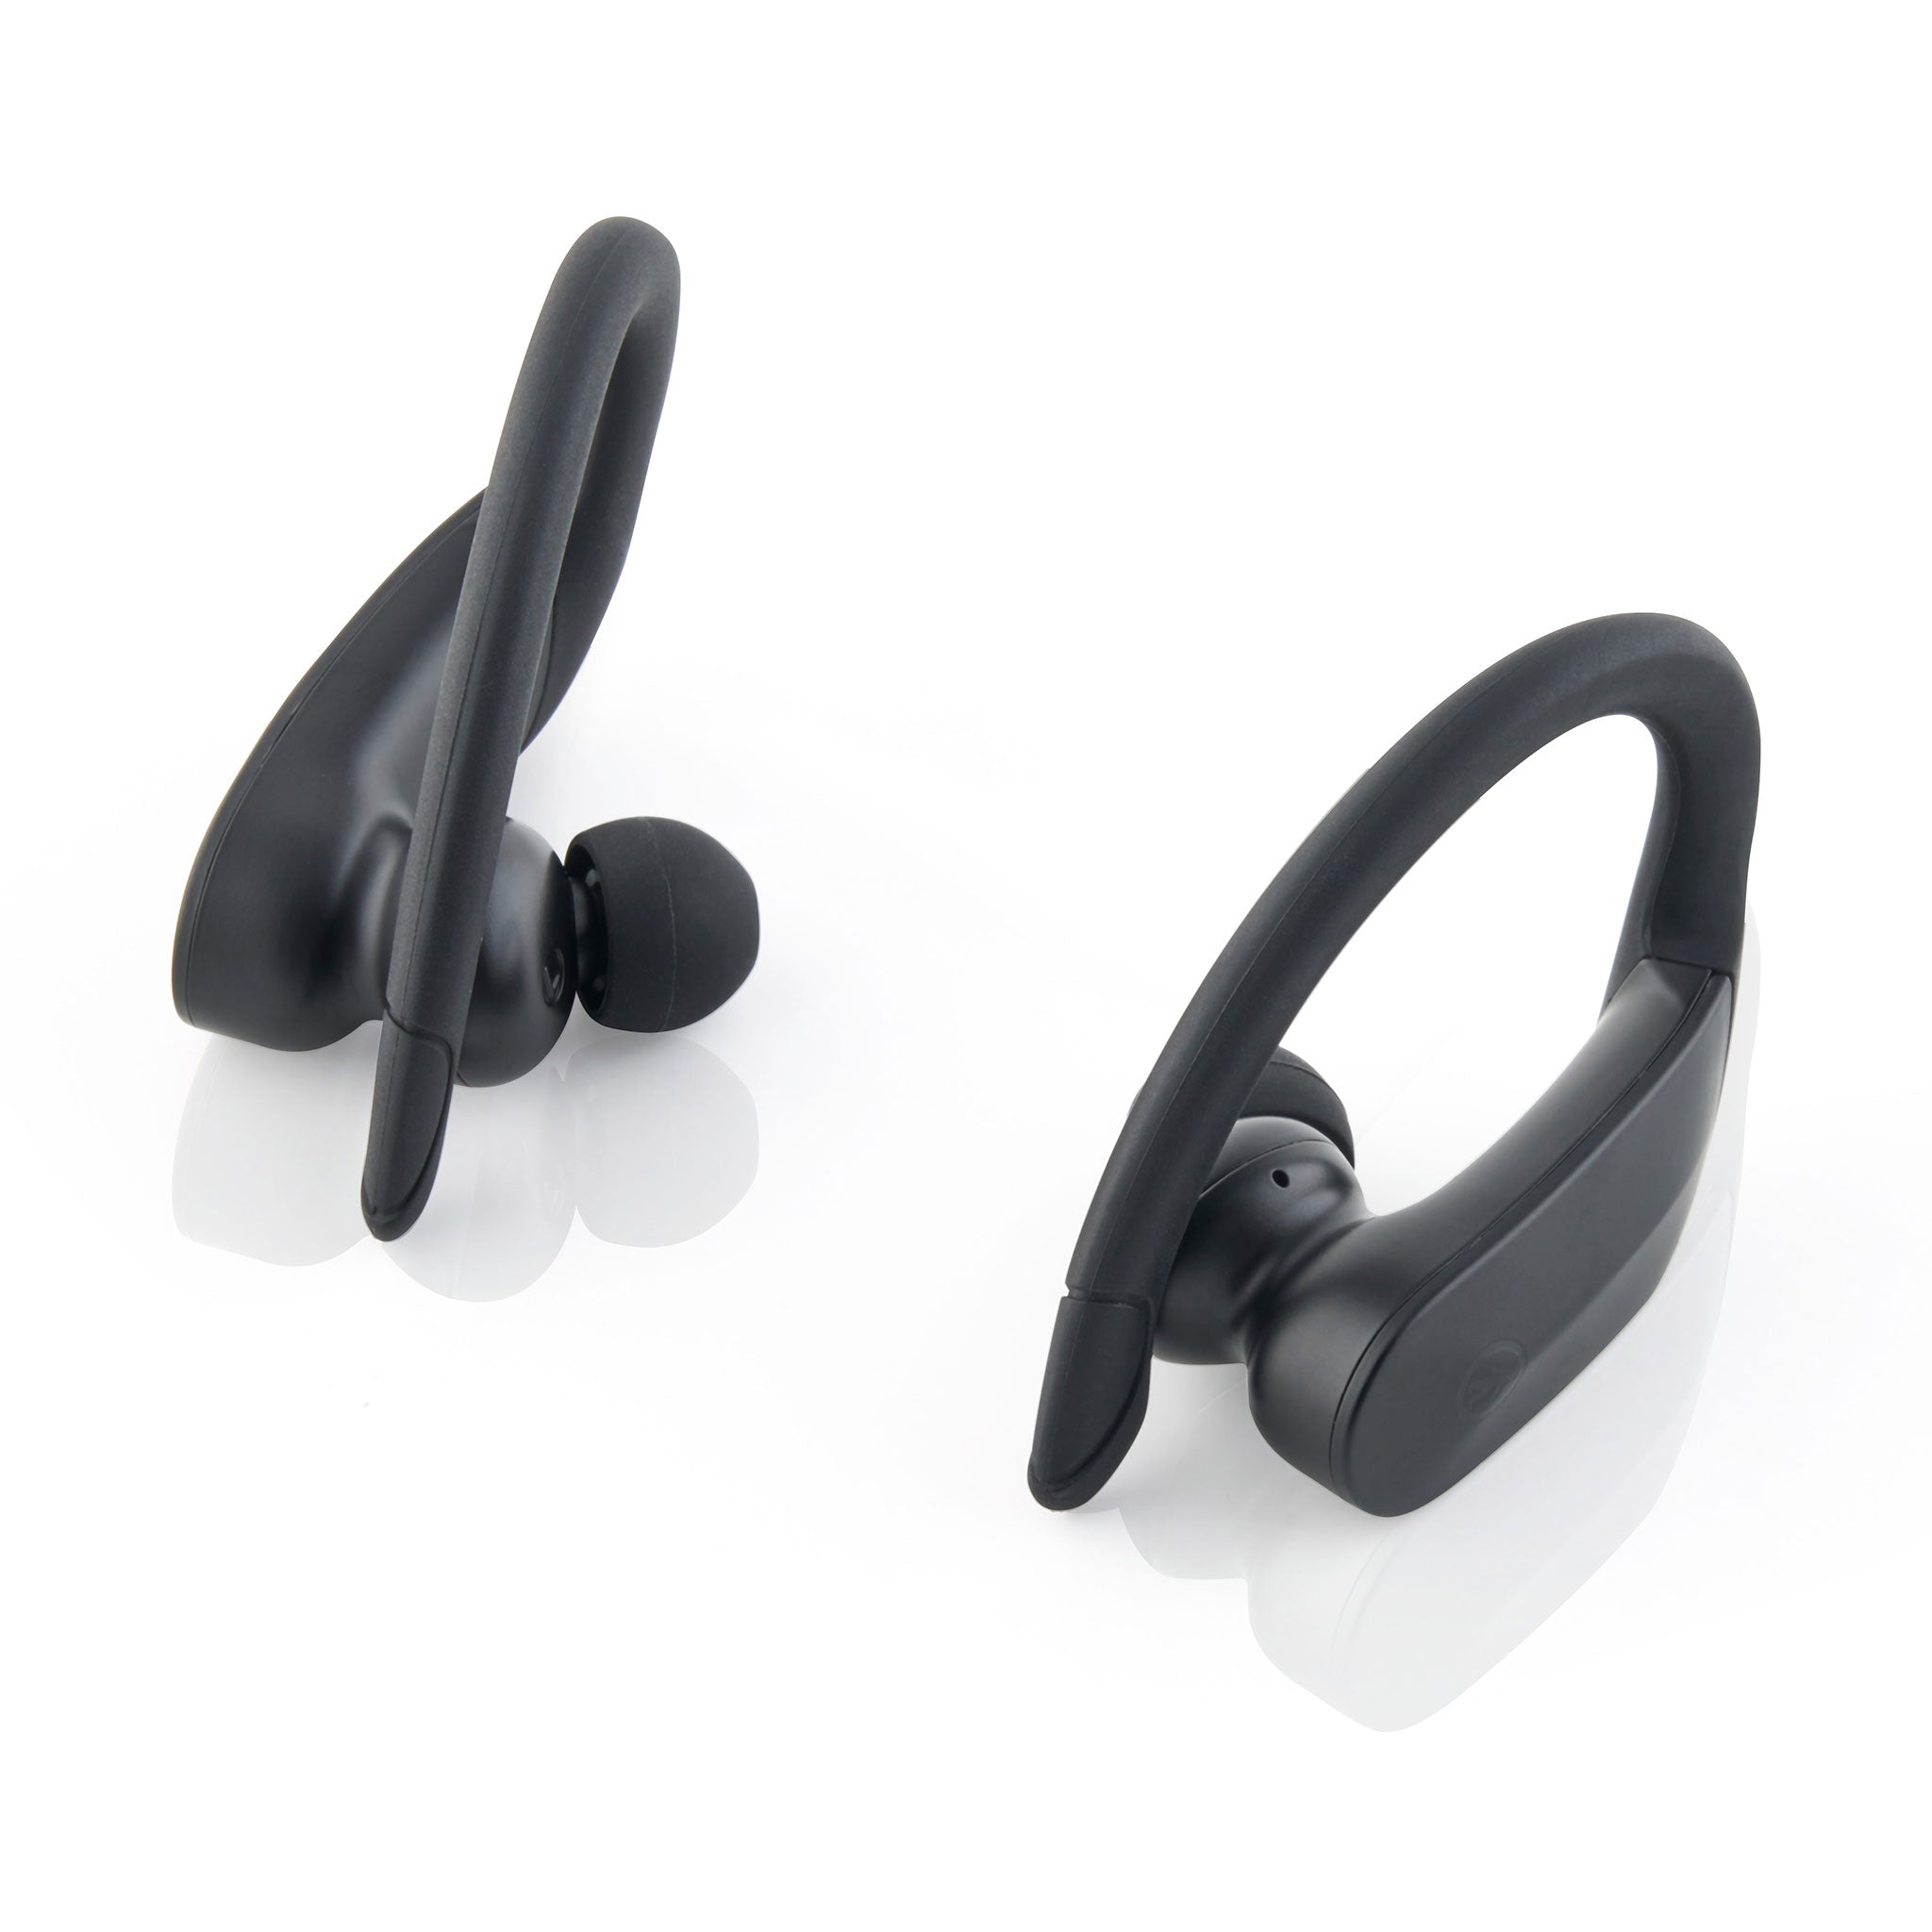 Outdoor Tech Mantas 2.0 Wireless Earbuds with Rechargable Case